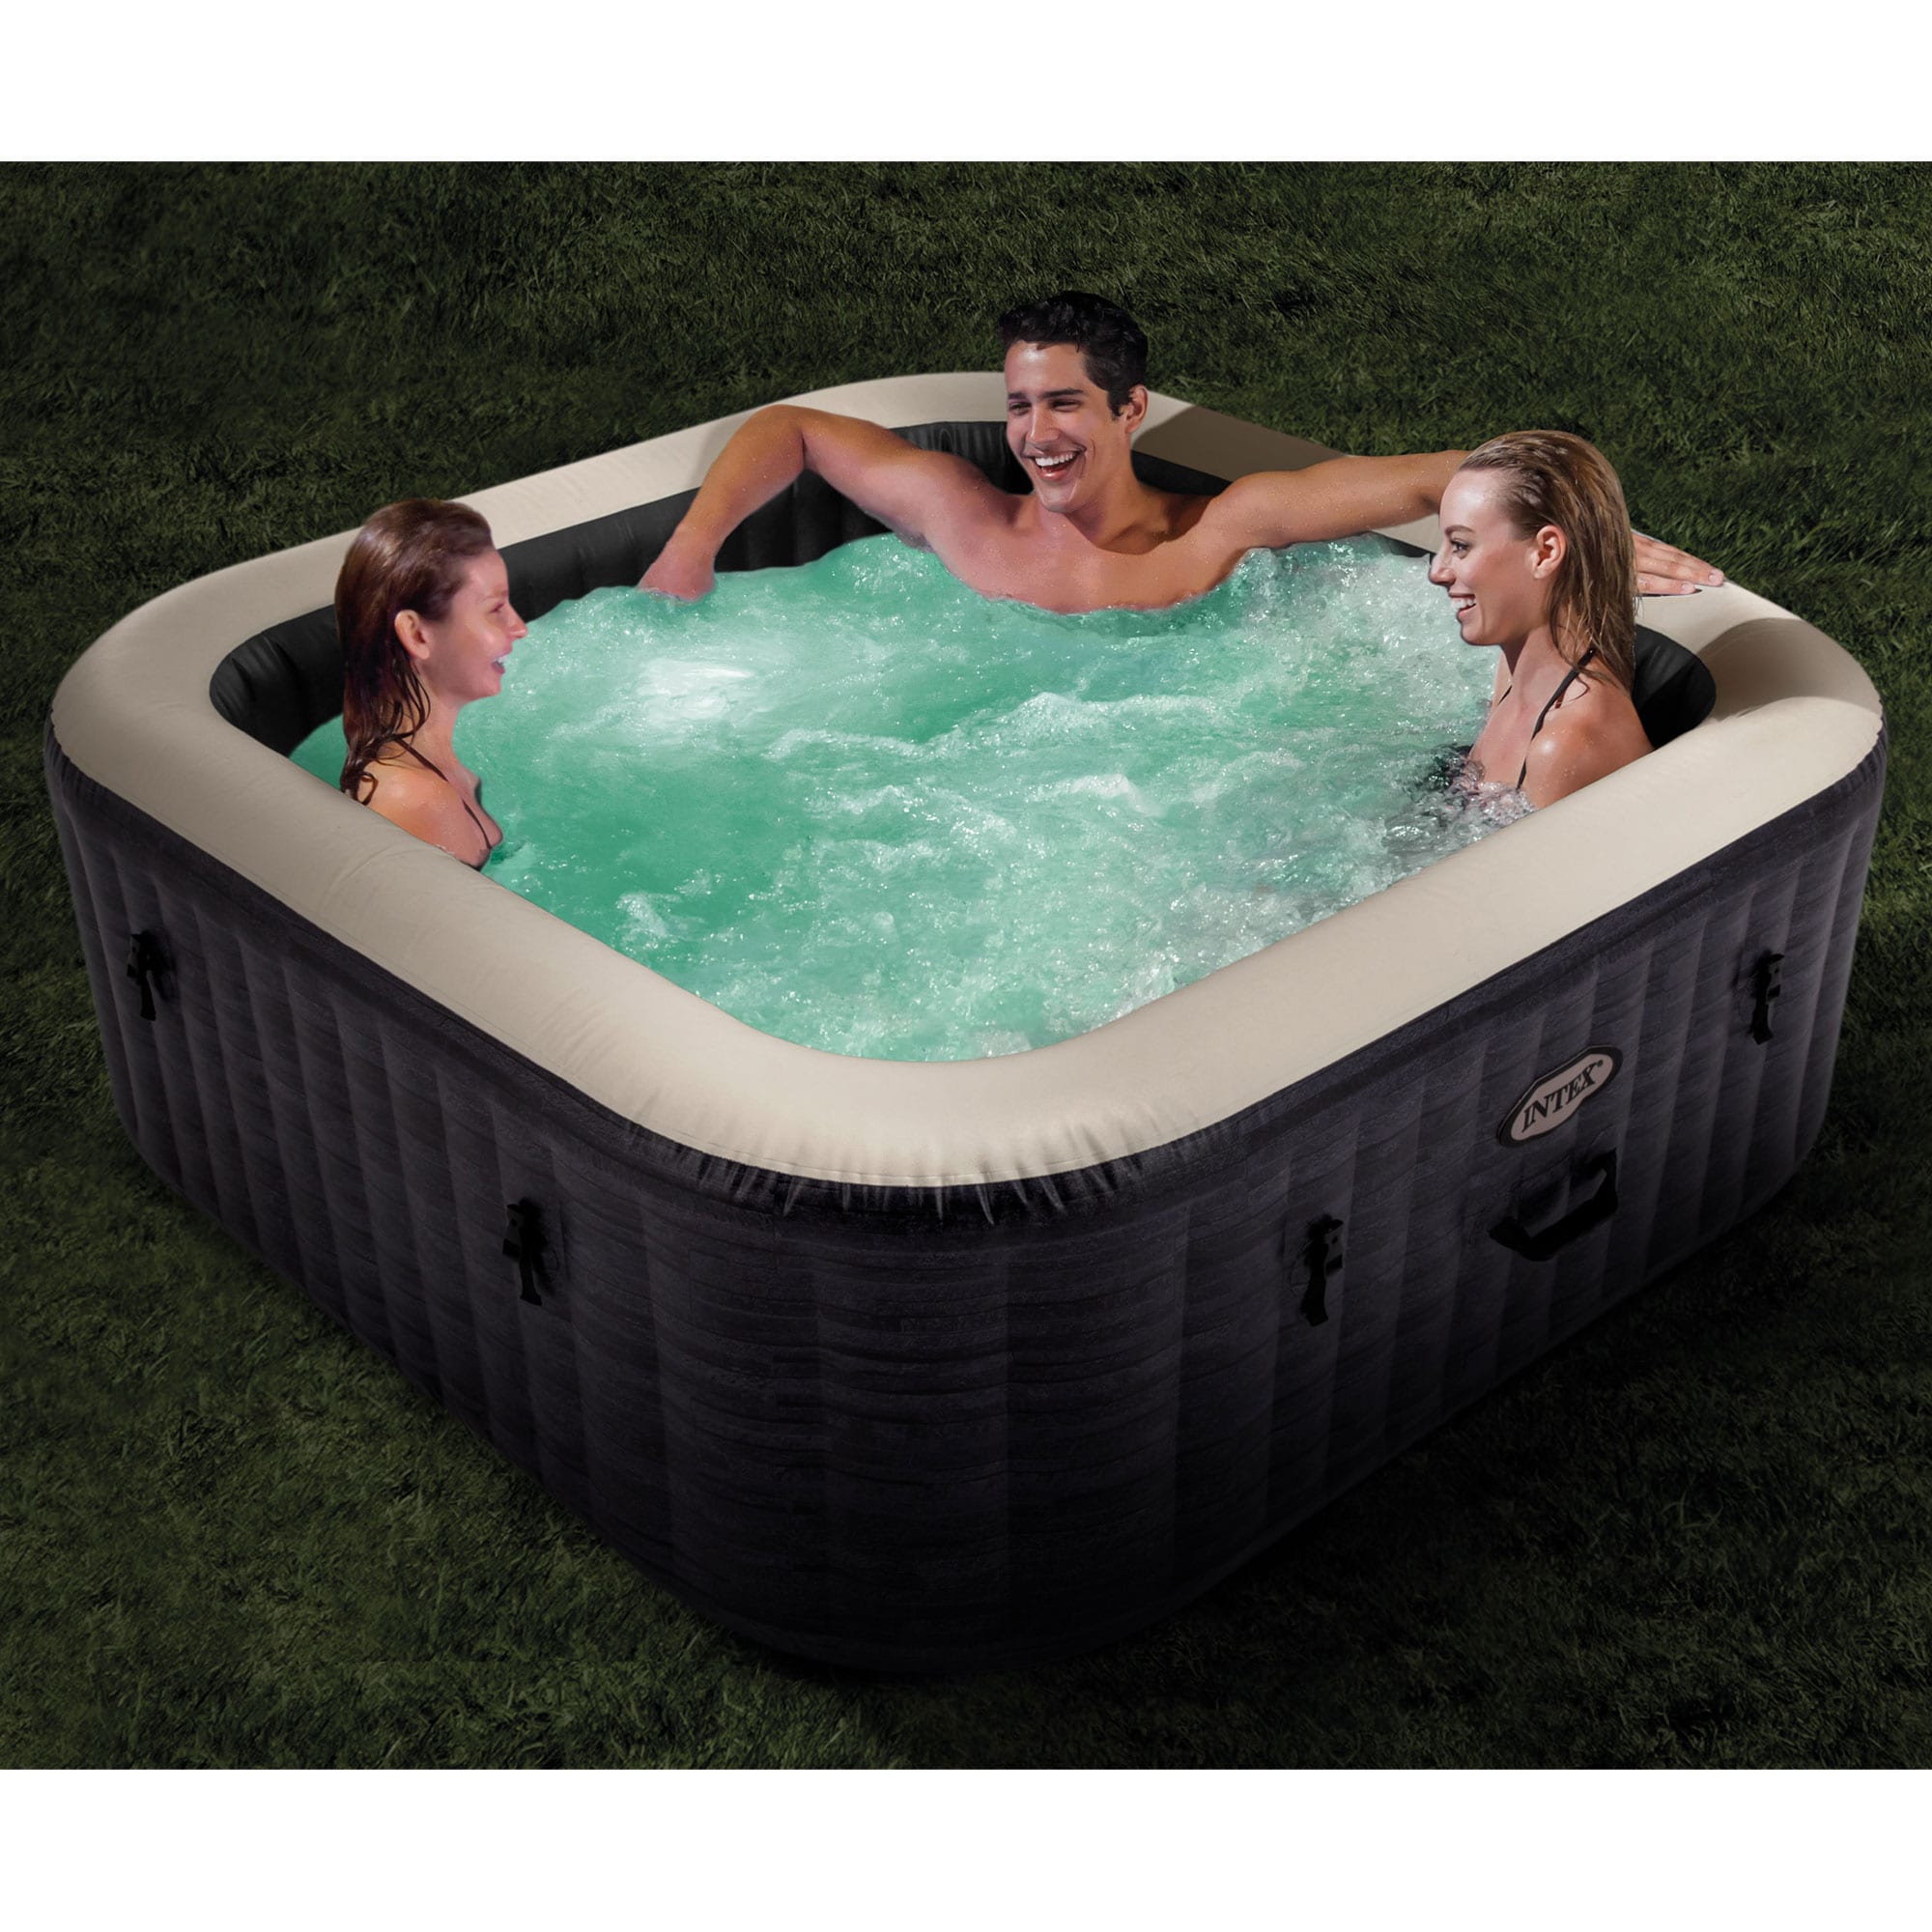 Hot Tub Mat - 74 x 72 Hot Tub Pad for Indoor and Outdoor Inflatable Hot  Tub, Hot Tub Rug, Portable Hot Tub, Pool Mat & Inflatable Hot Tub  Accessories